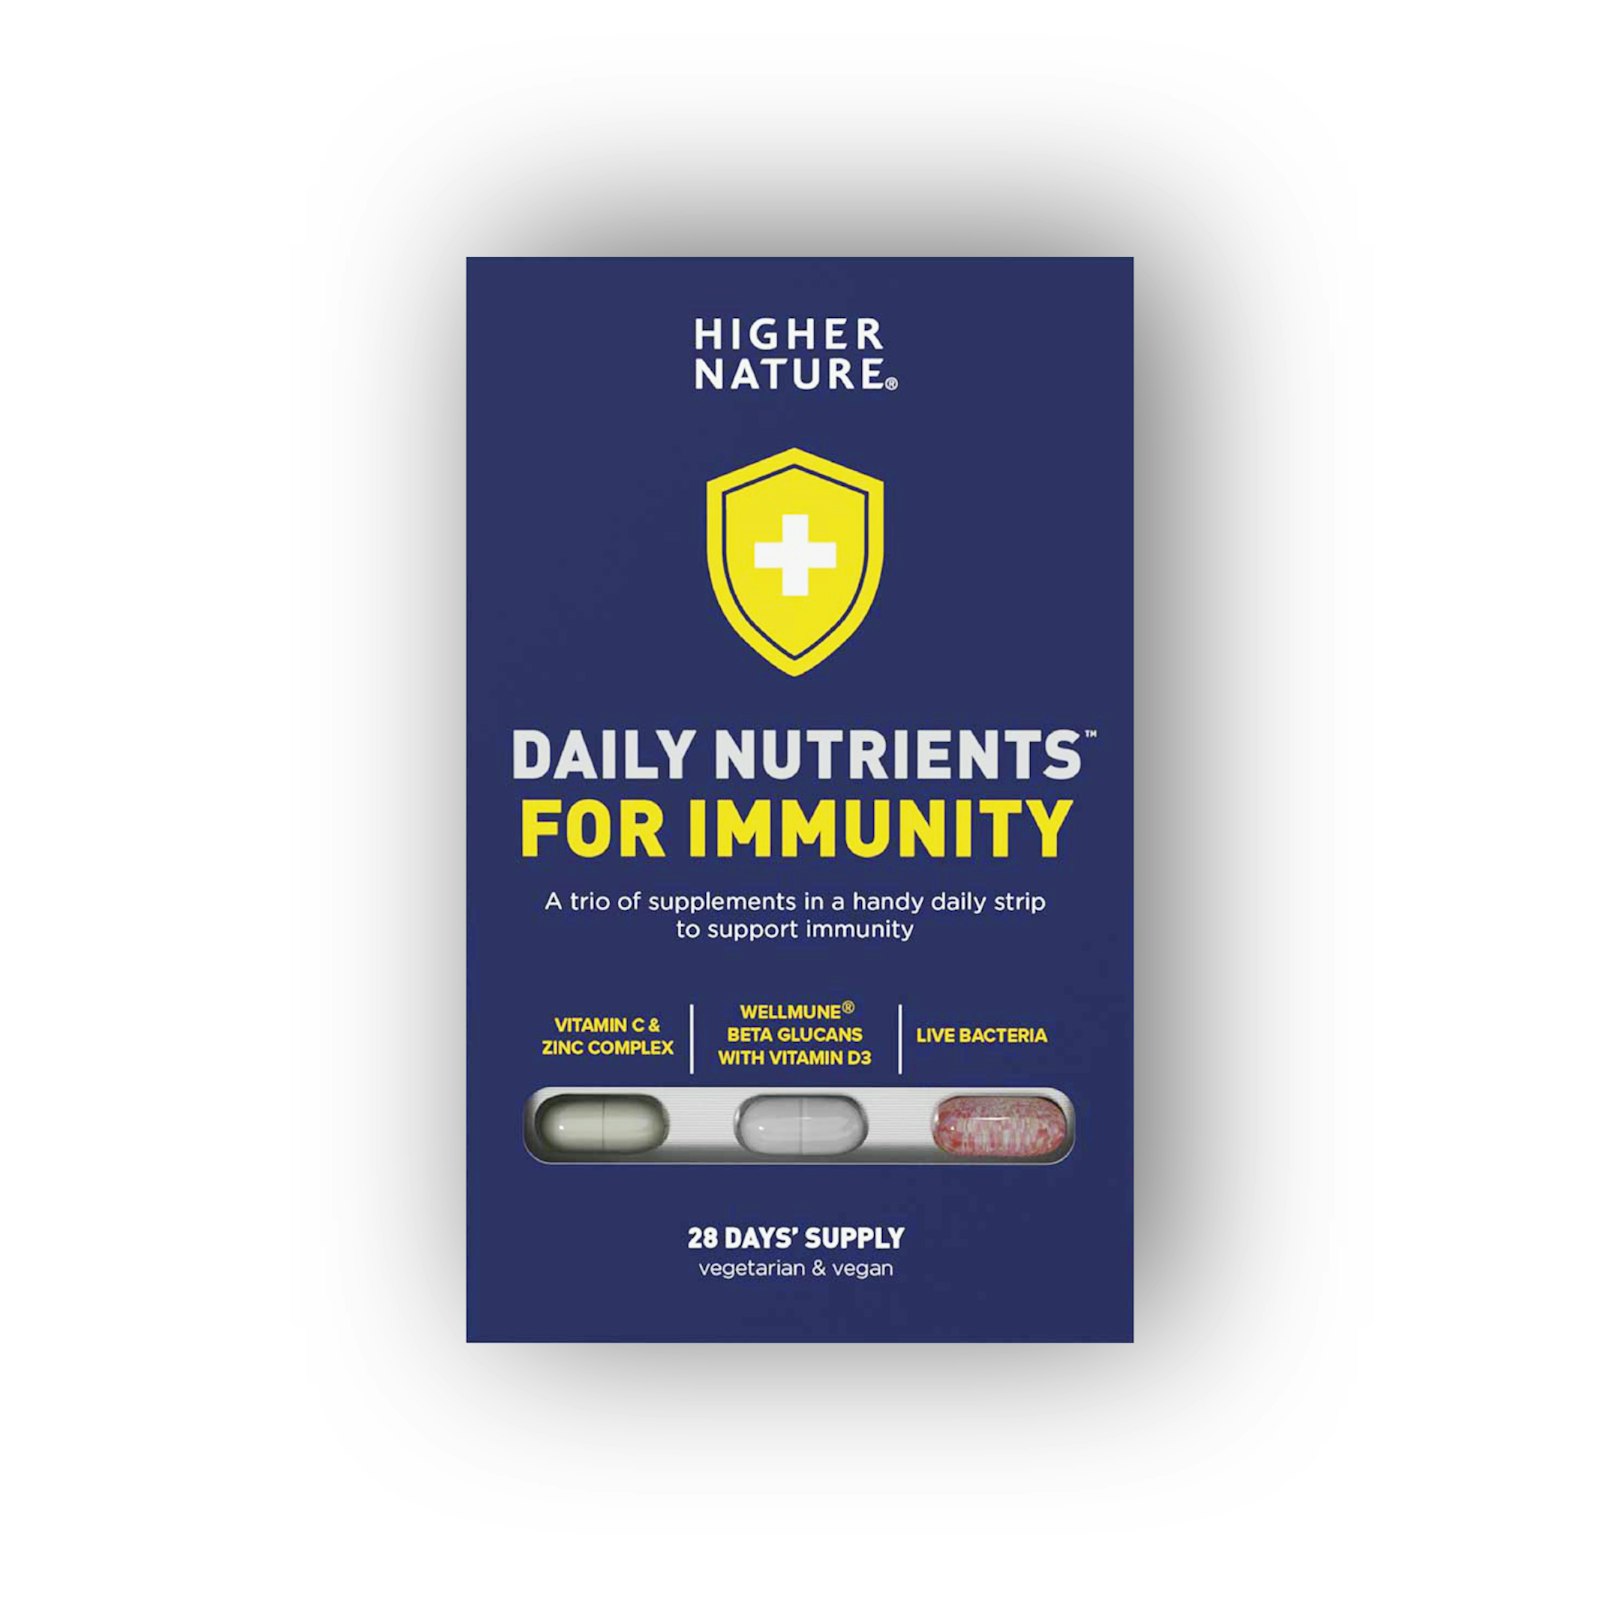 HIGHER NATURE Daily Nutrients - Immunity